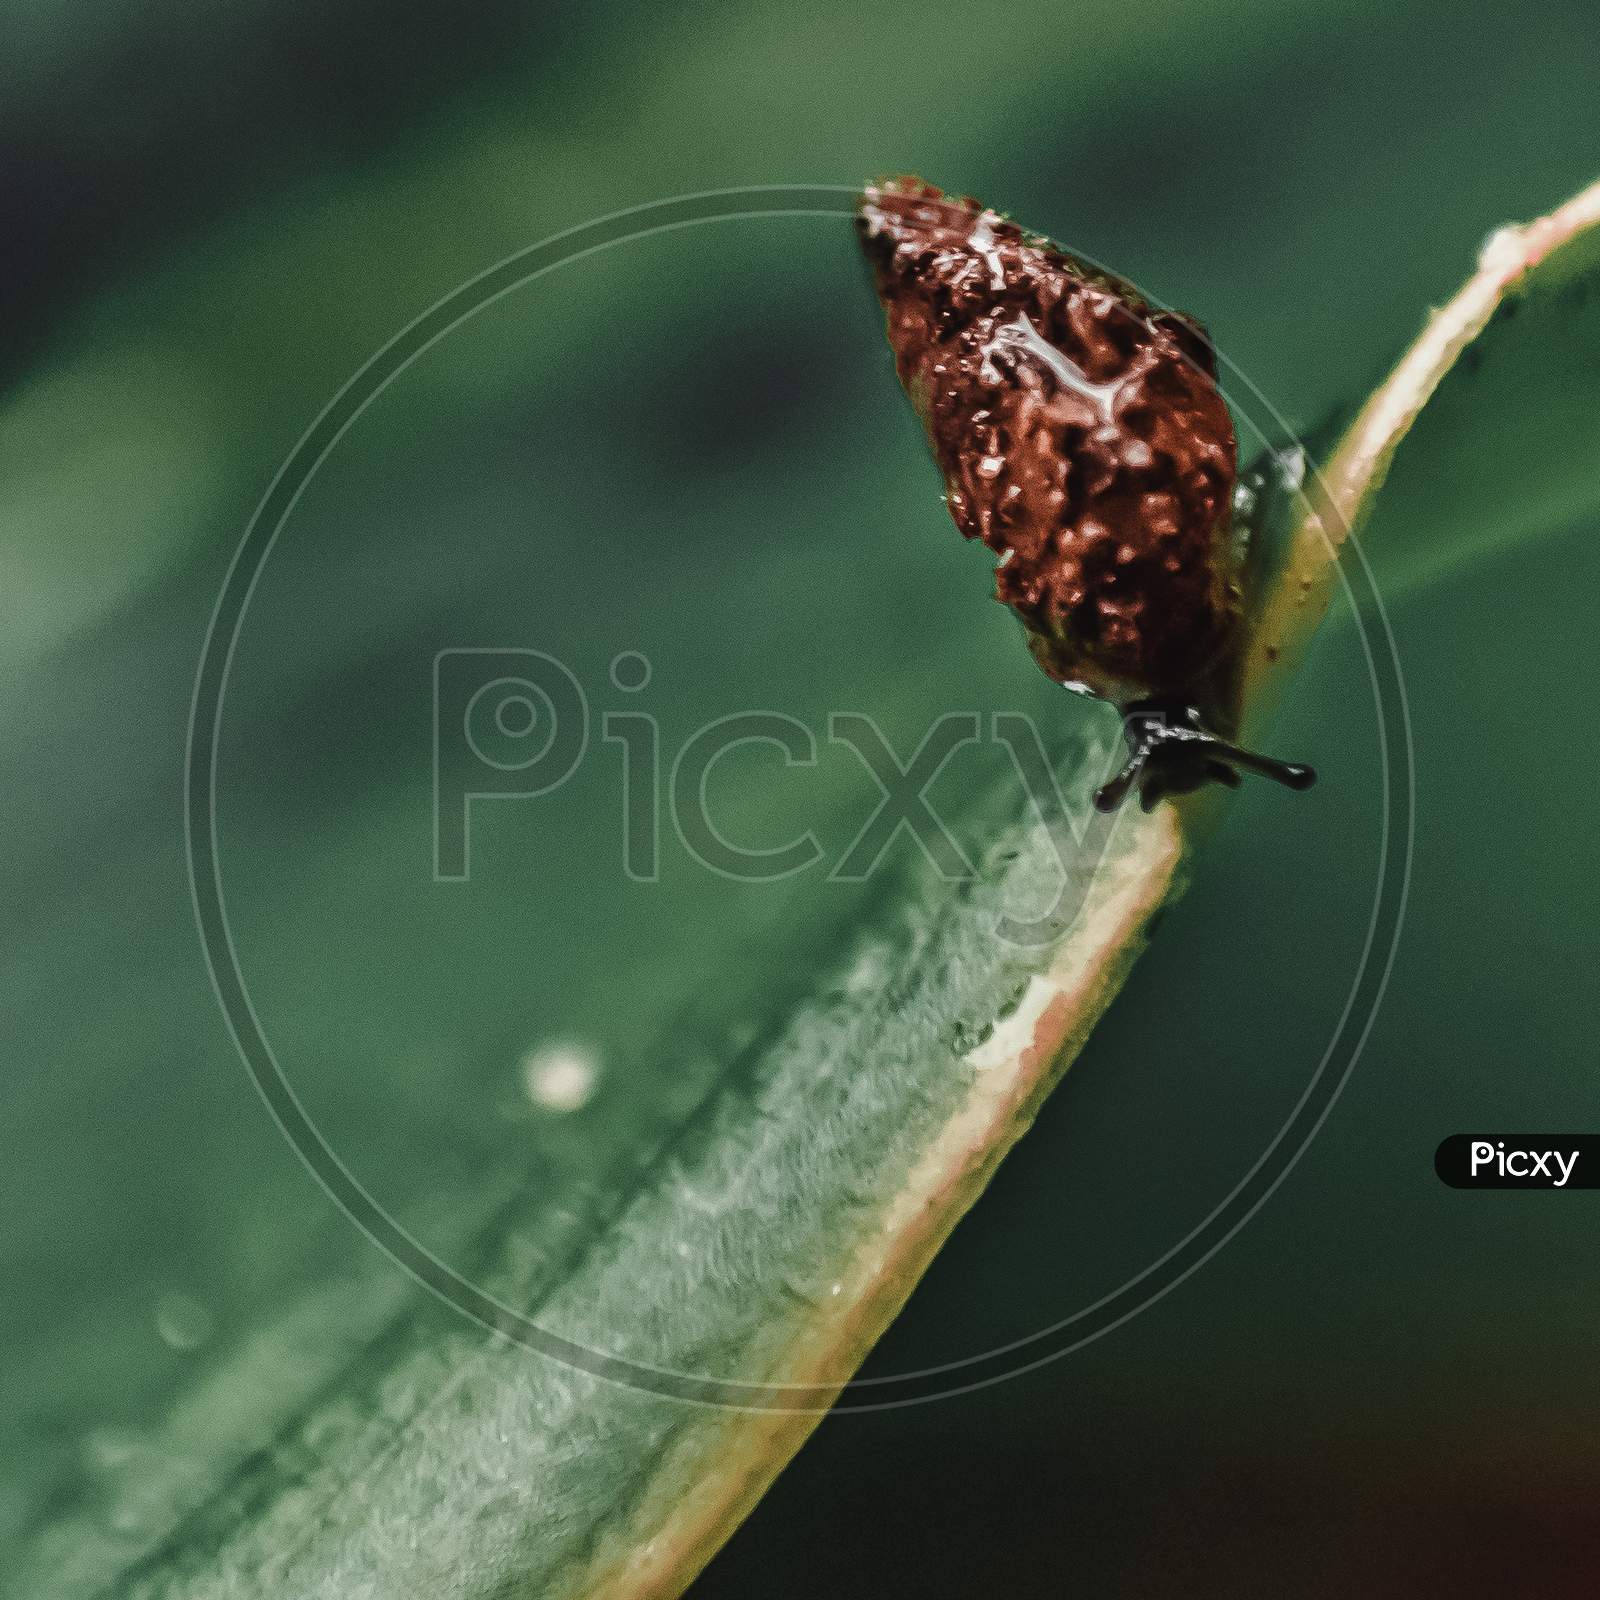 A small snail on the edge of a green leaf